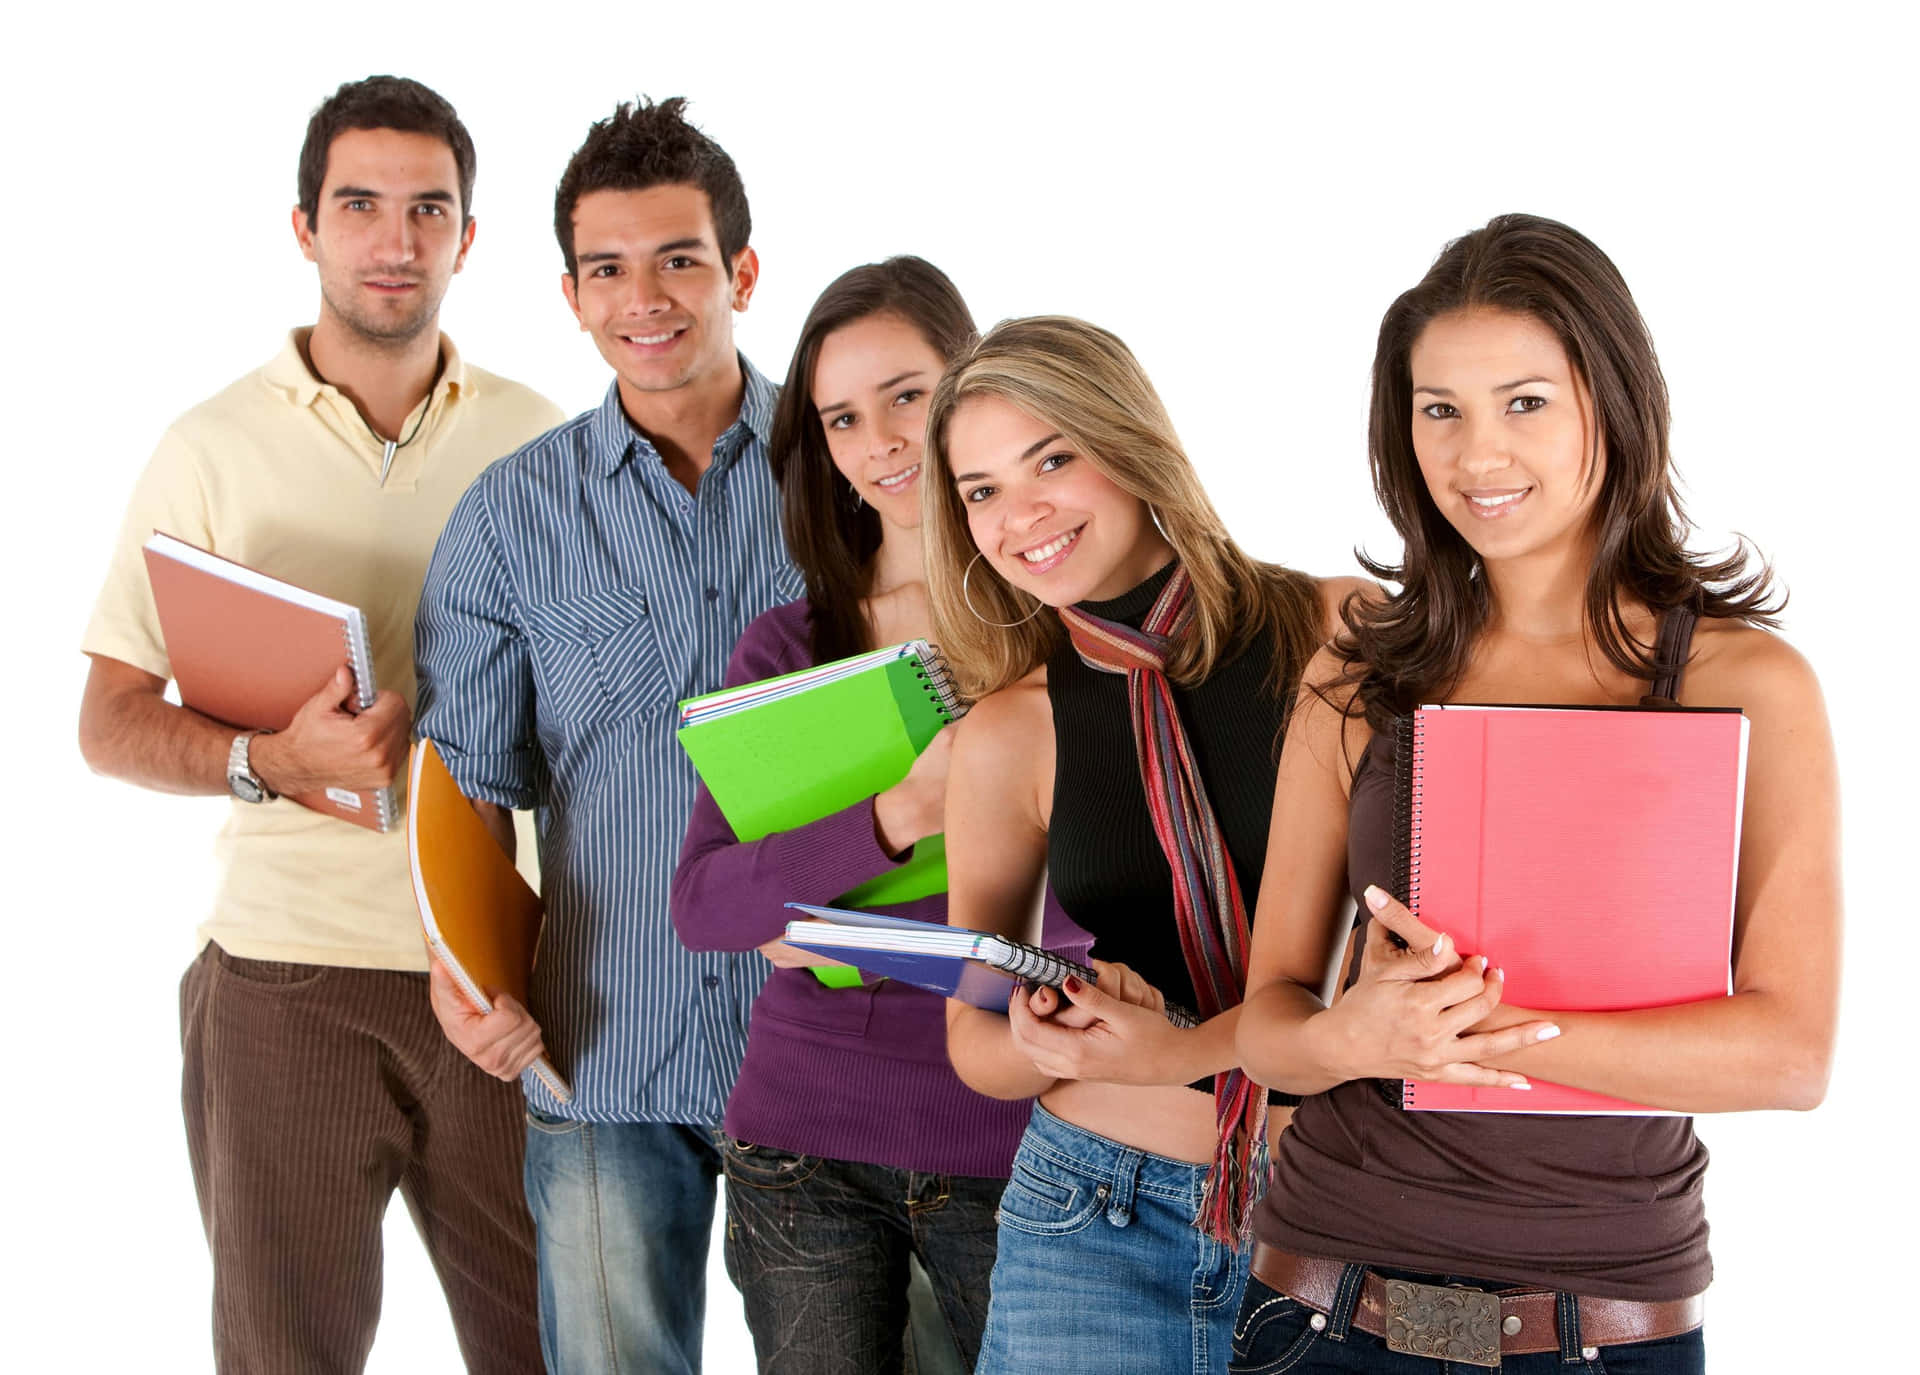 Groupof Students Posing With Books.jpg